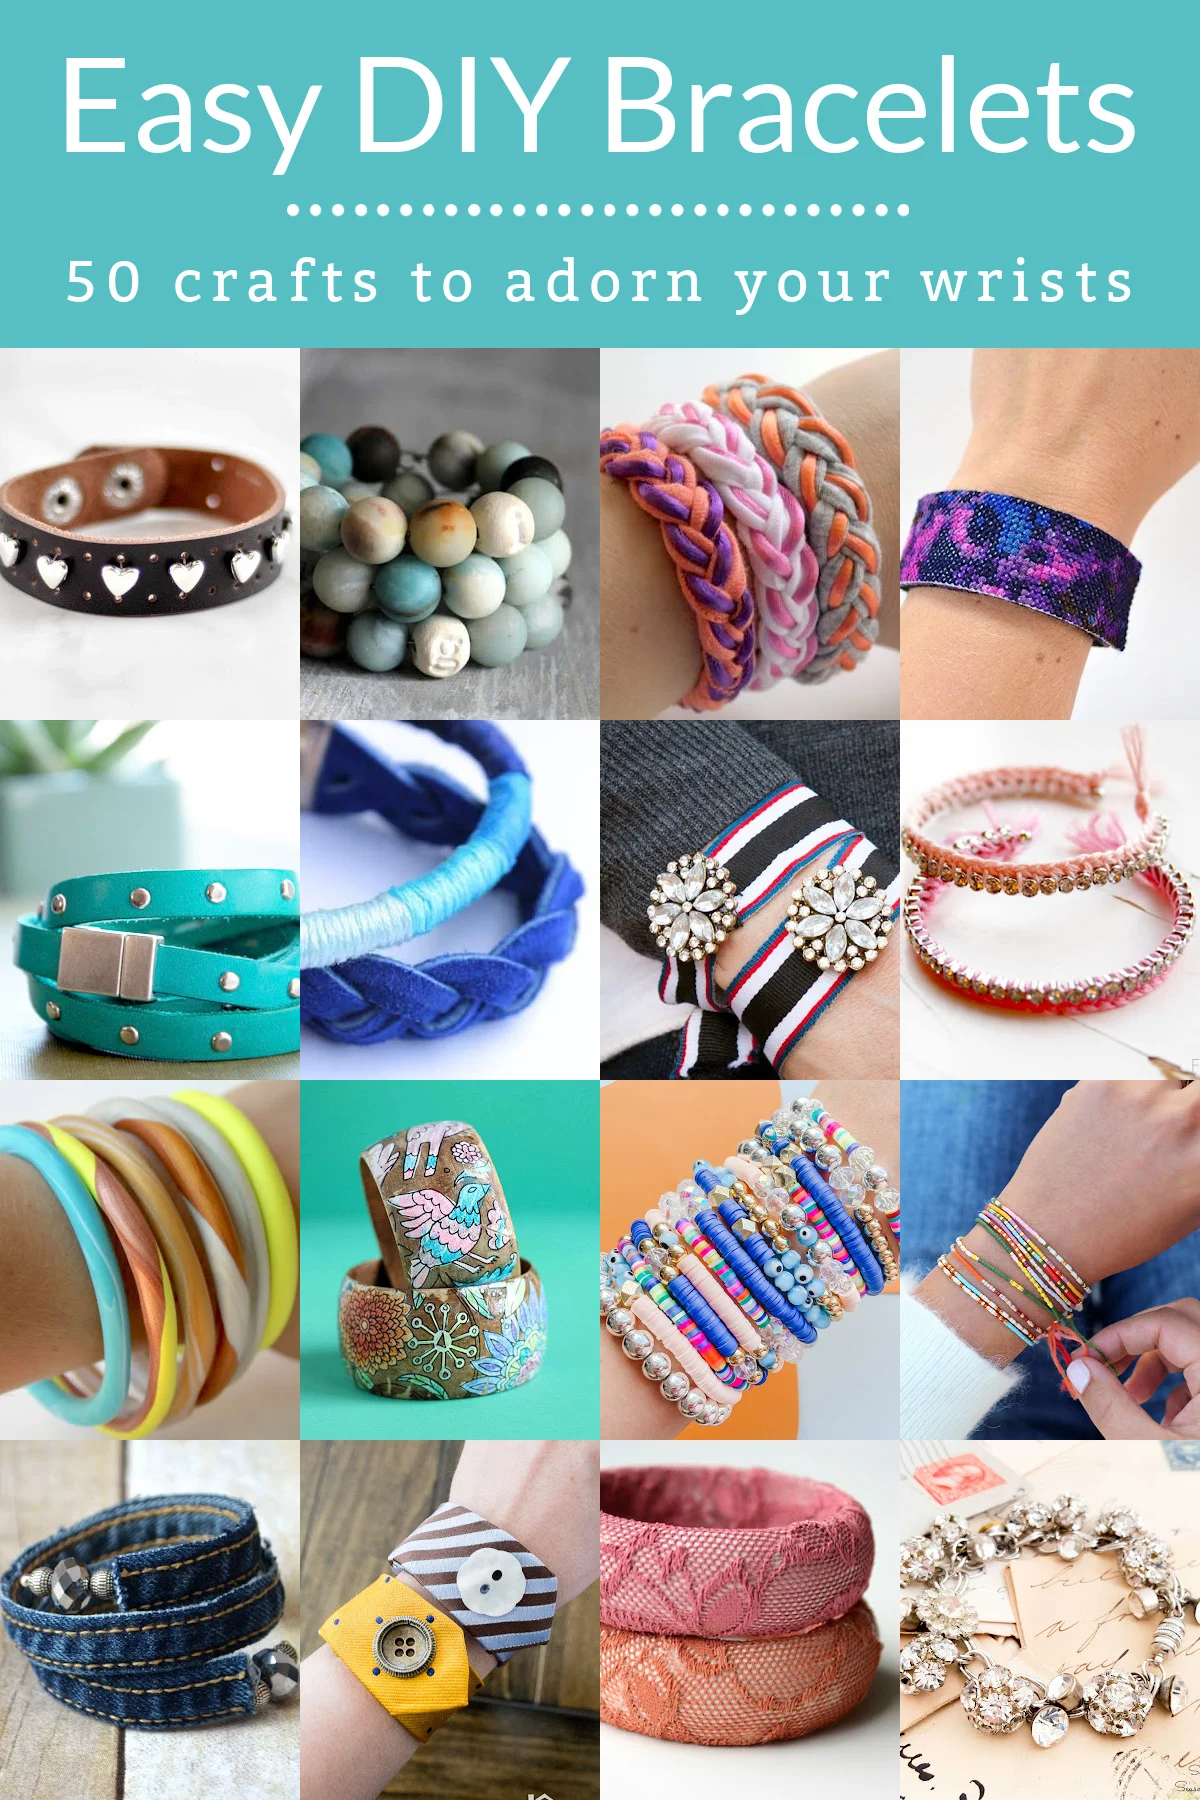 Create Your Own Unique Style: Crafting A Custom Bracelet With